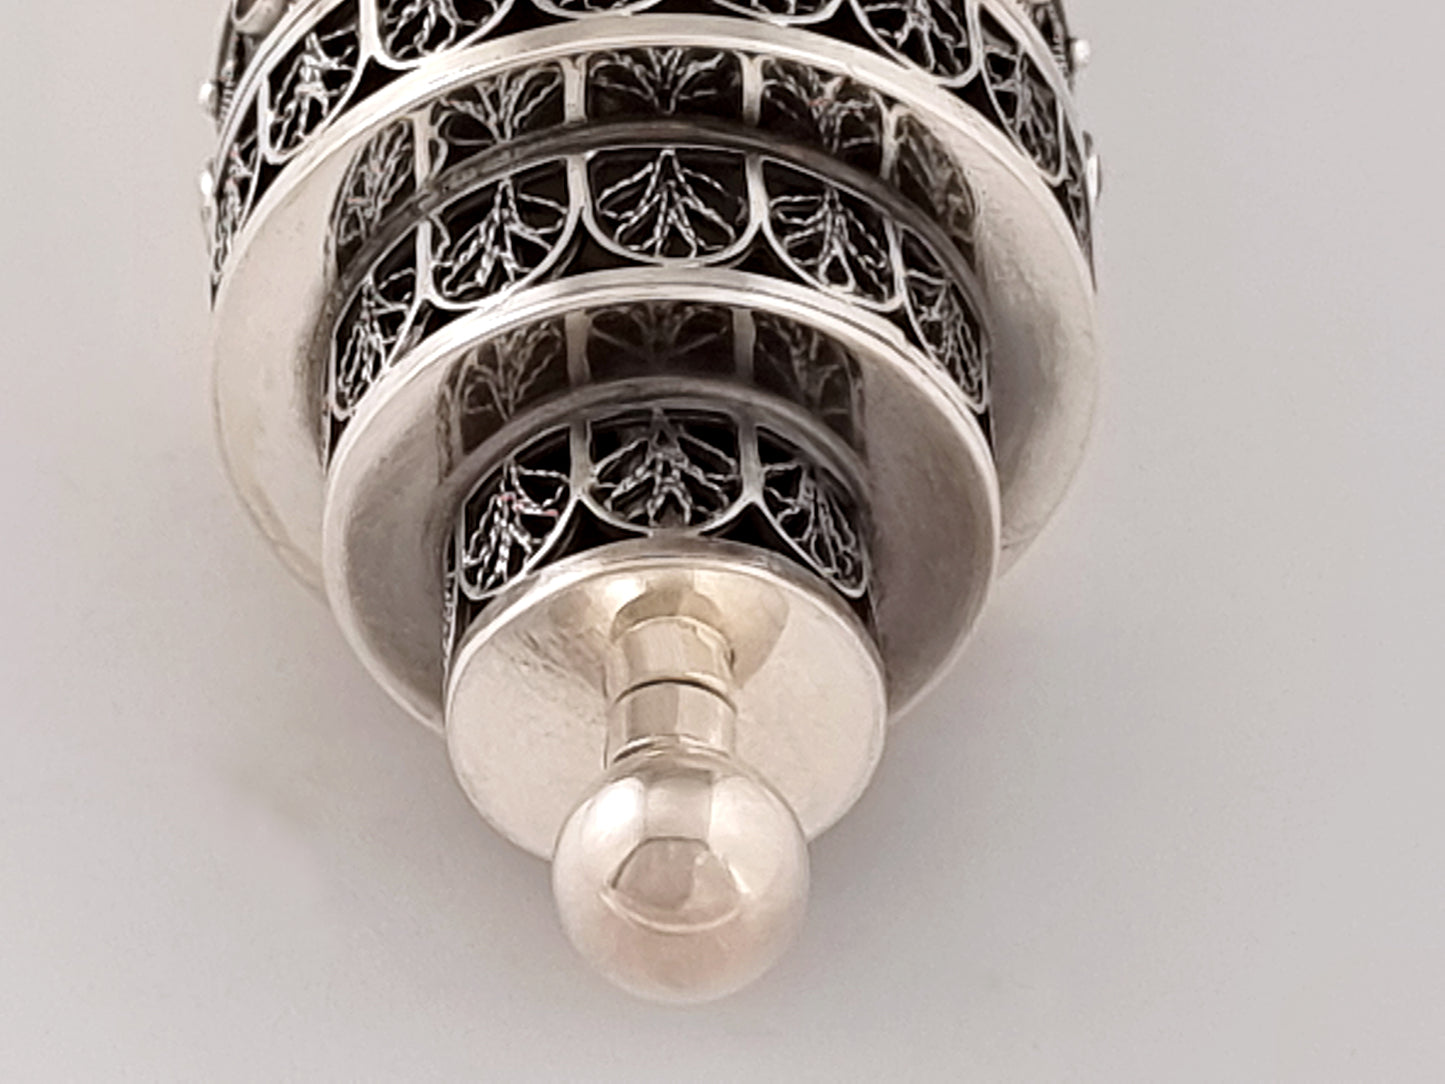 A polished silver ball at the top of our Esther scroll.